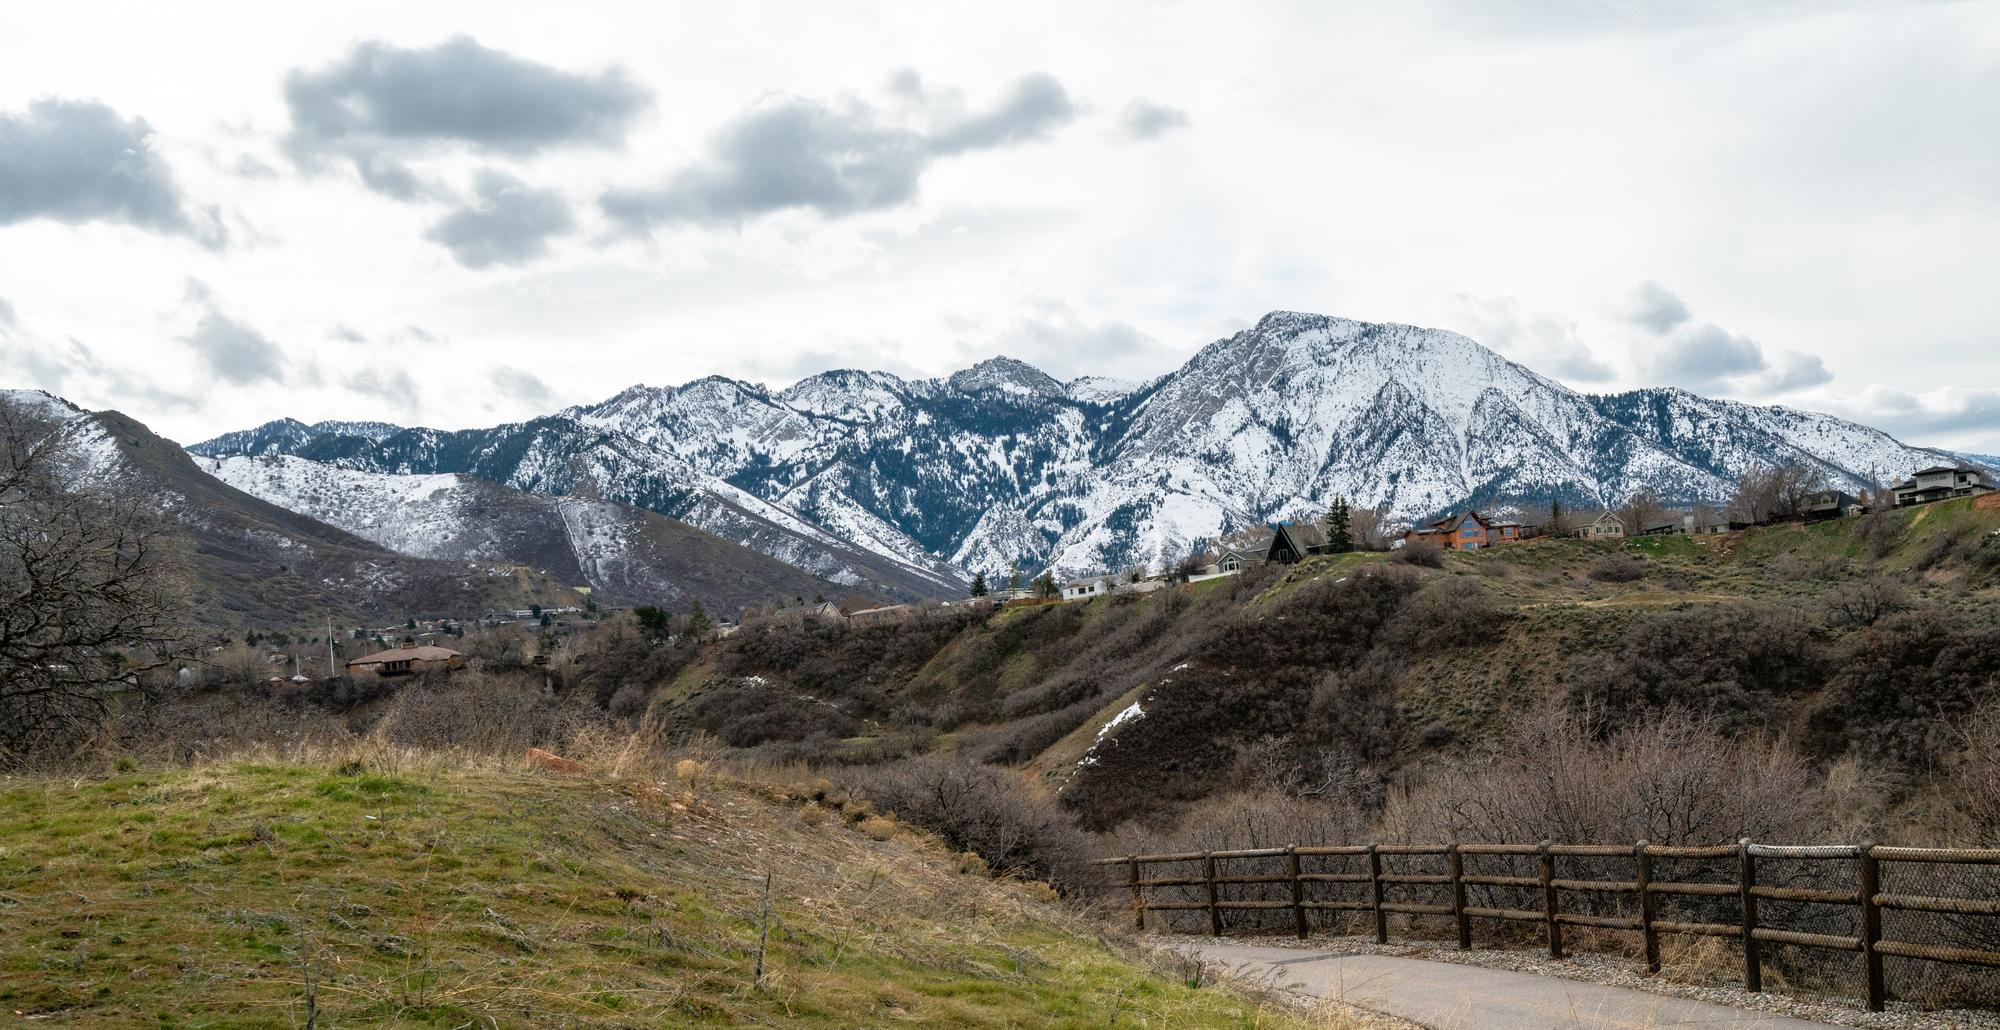 View of Wasatch Mountains from Parley's Historic Nature Park